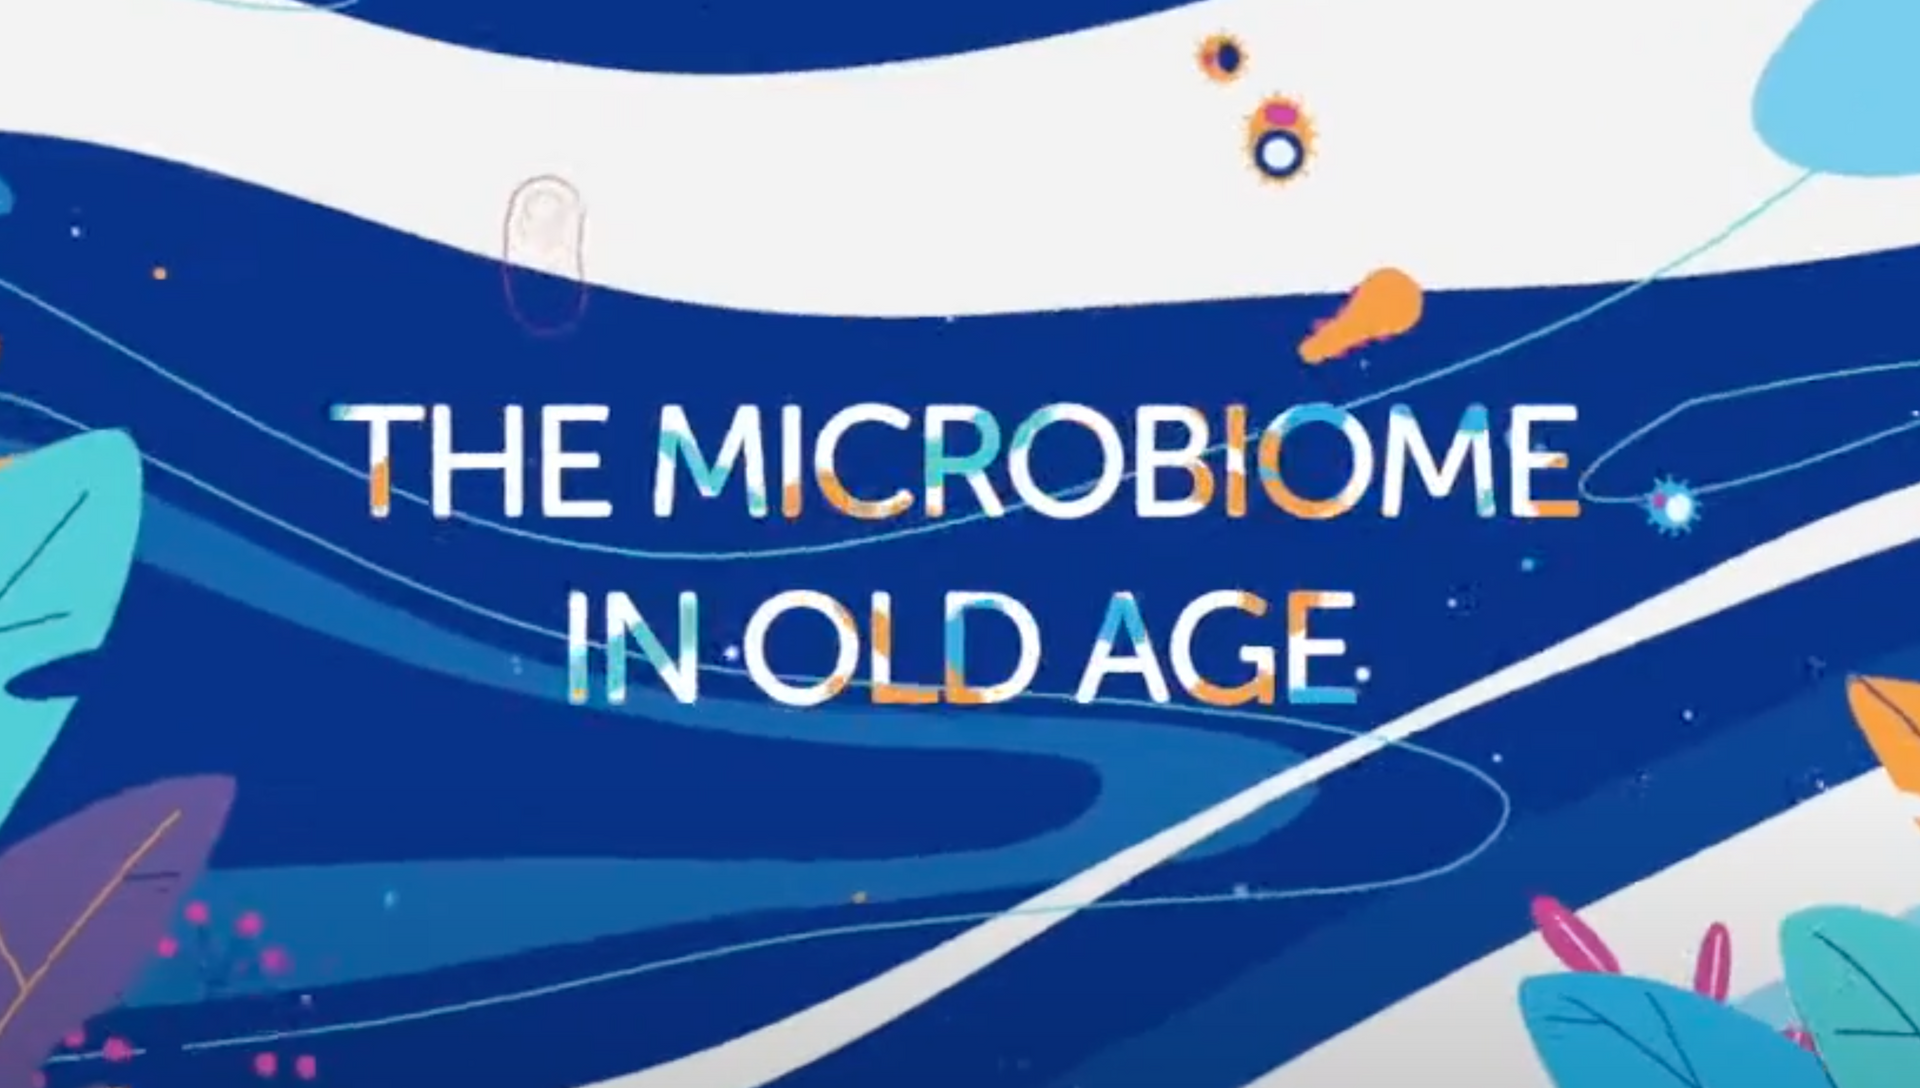 Load video: Your microbiome throughout life